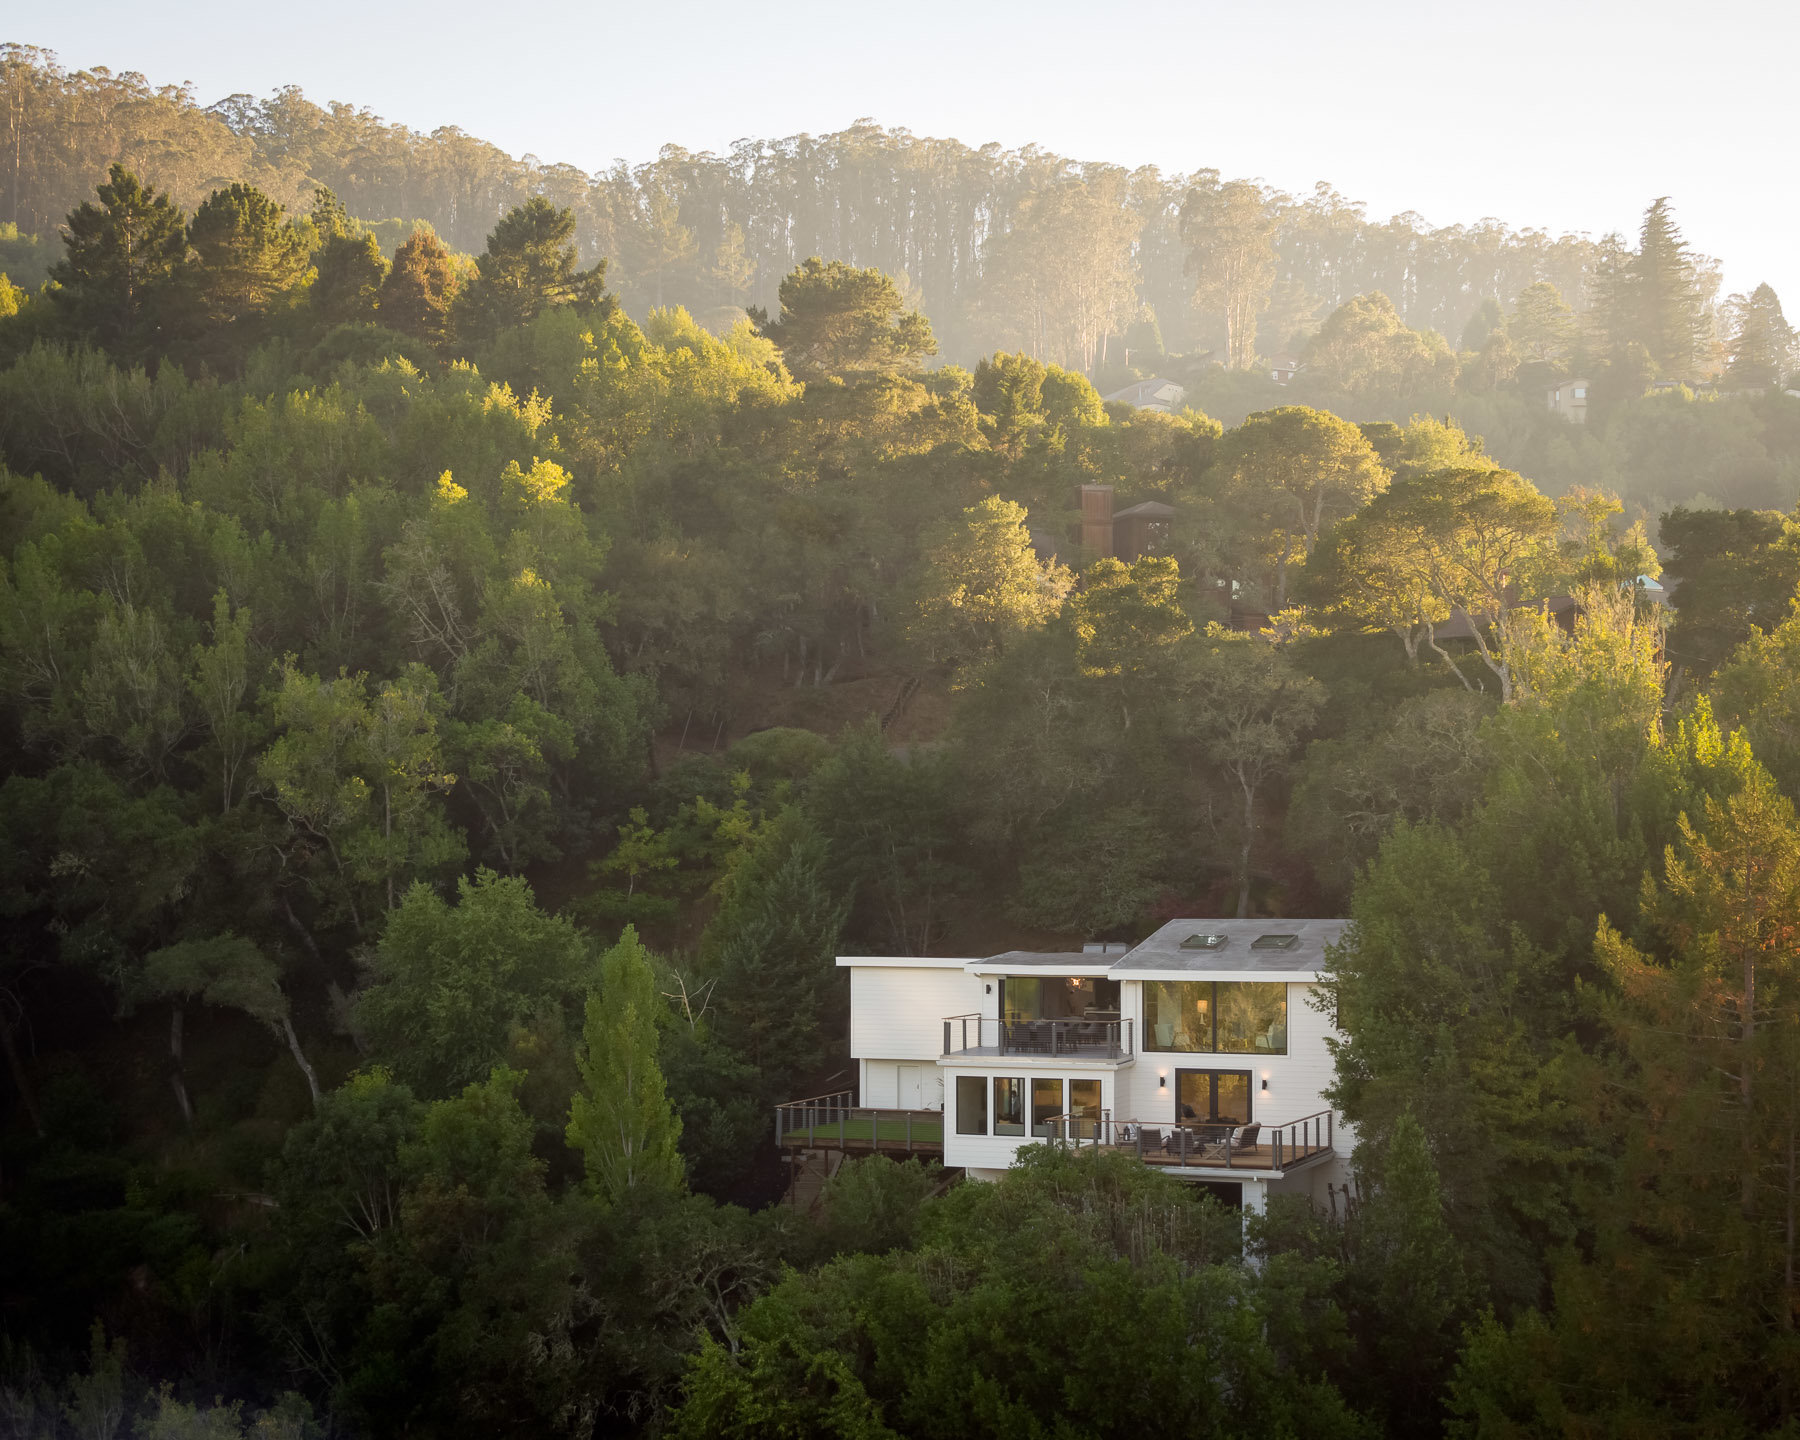 A striking Mill Valley home, designed by Brooks McDonald Architecture, nestled in untamed nature.